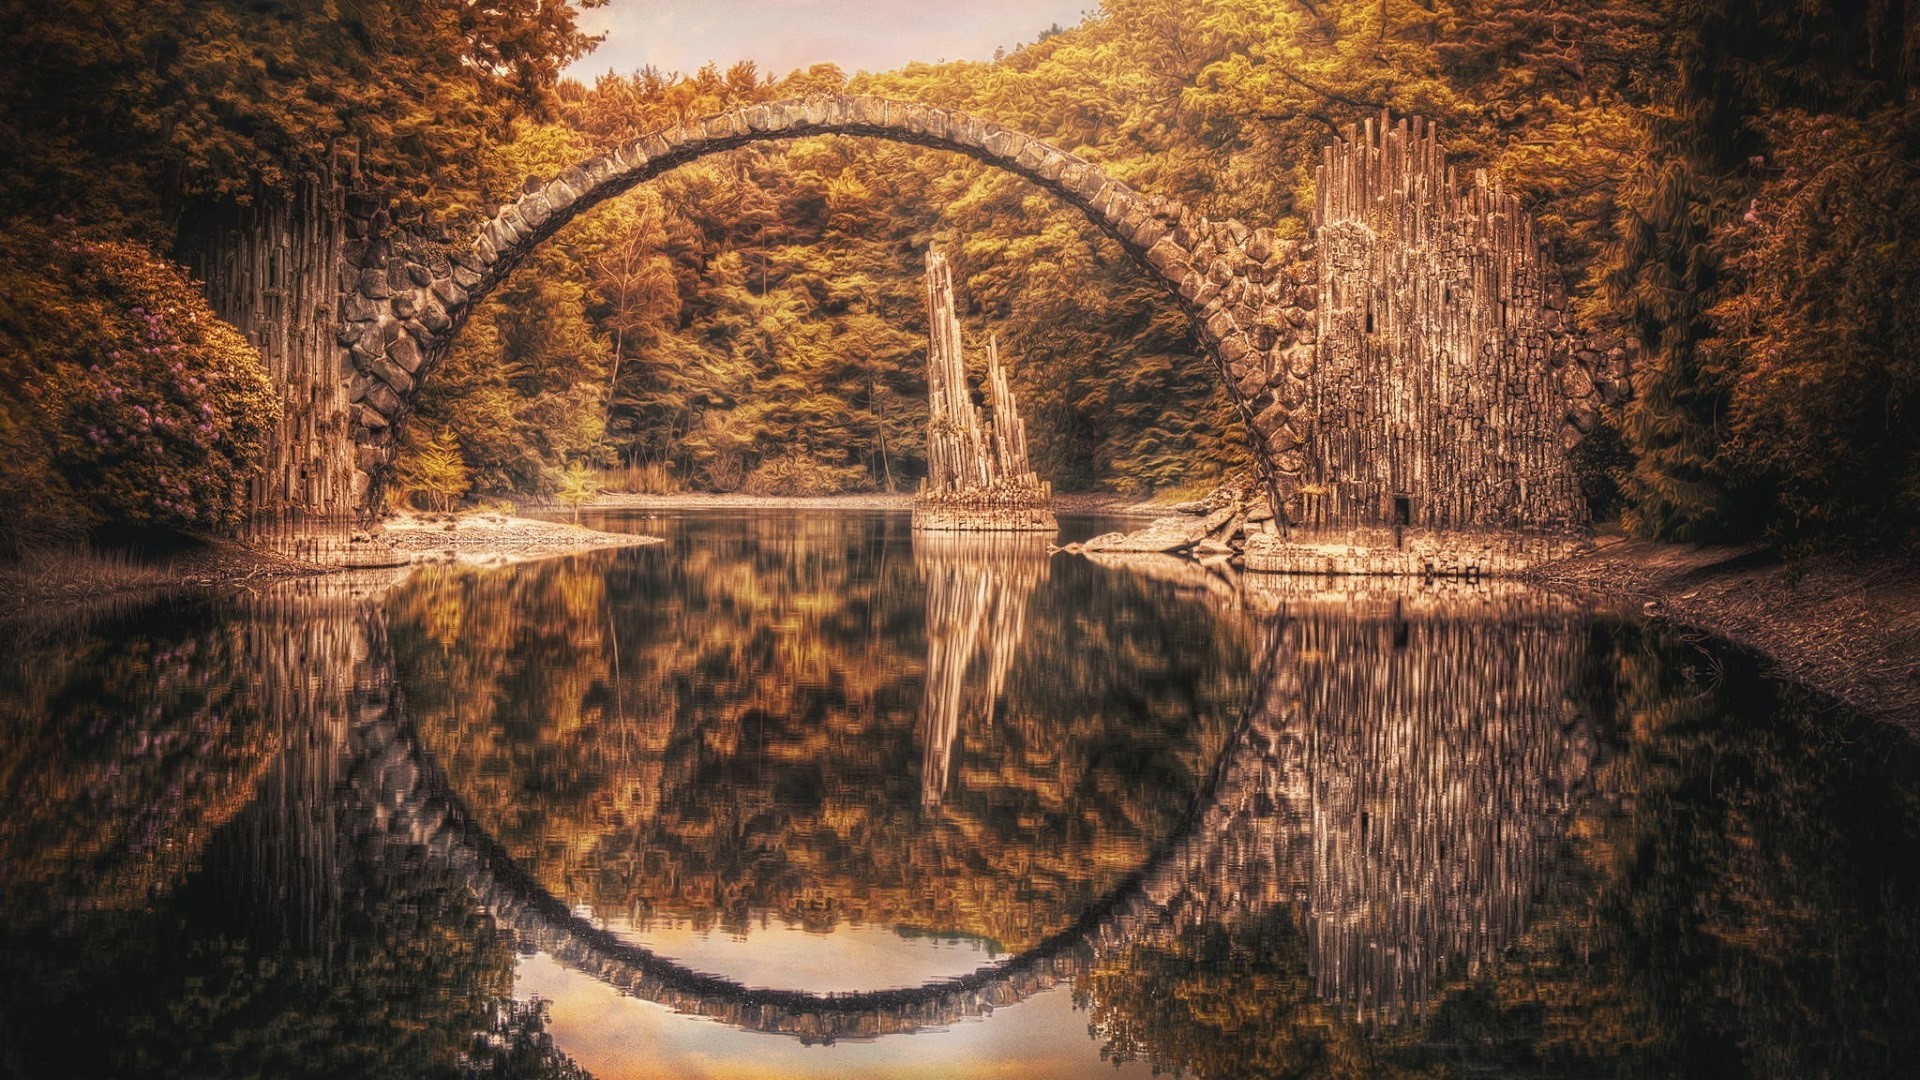 General 1920x1080 landscape HDR reflection nature bridge rock formation rocks water calm river fall trees forest Germany